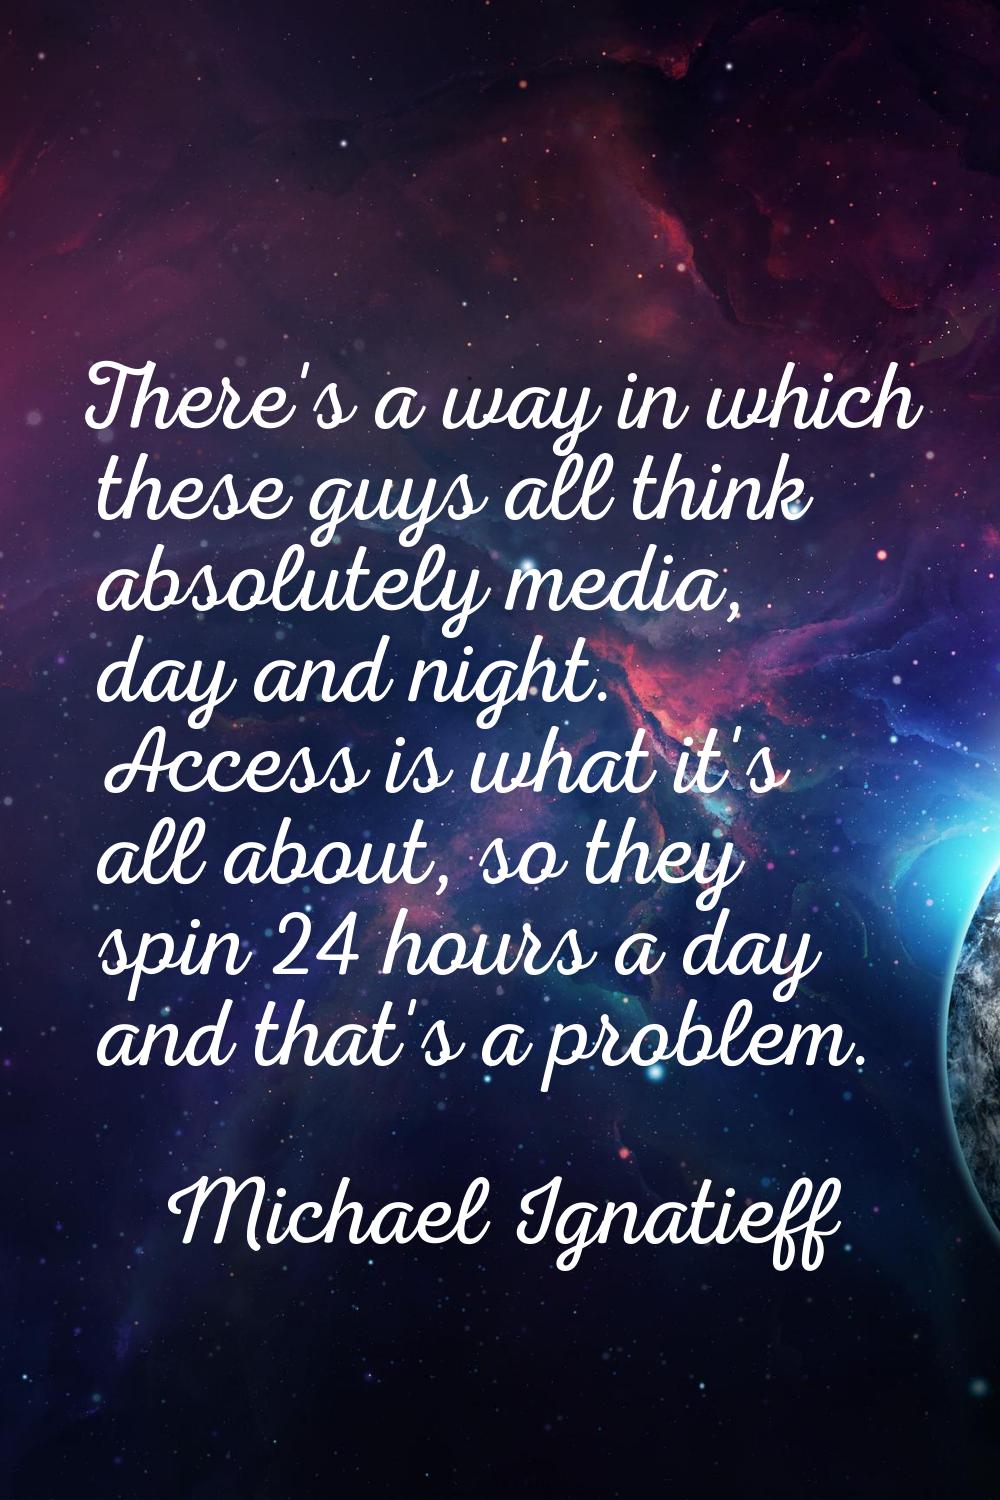 There's a way in which these guys all think absolutely media, day and night. Access is what it's al